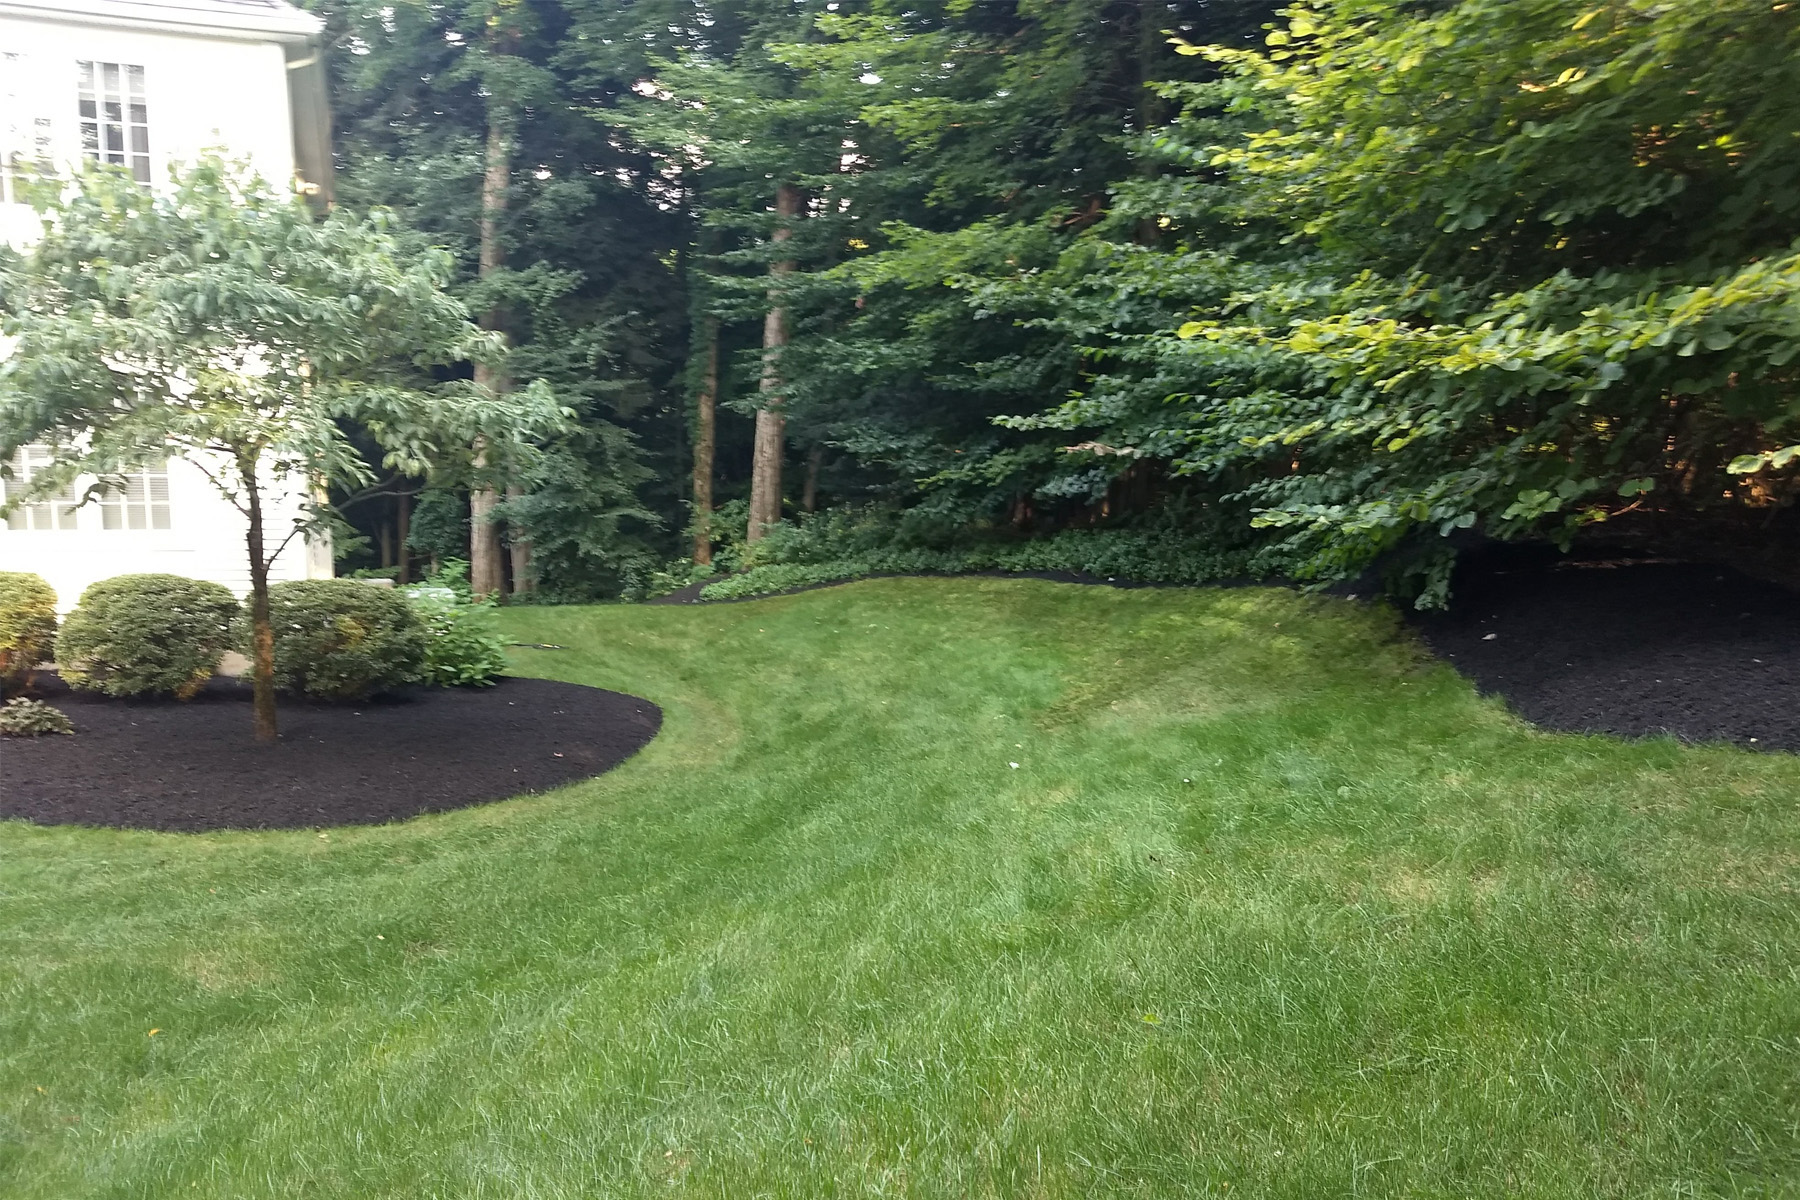 Thumbnail of completed trimming, bed cleanup, and fresh mulch